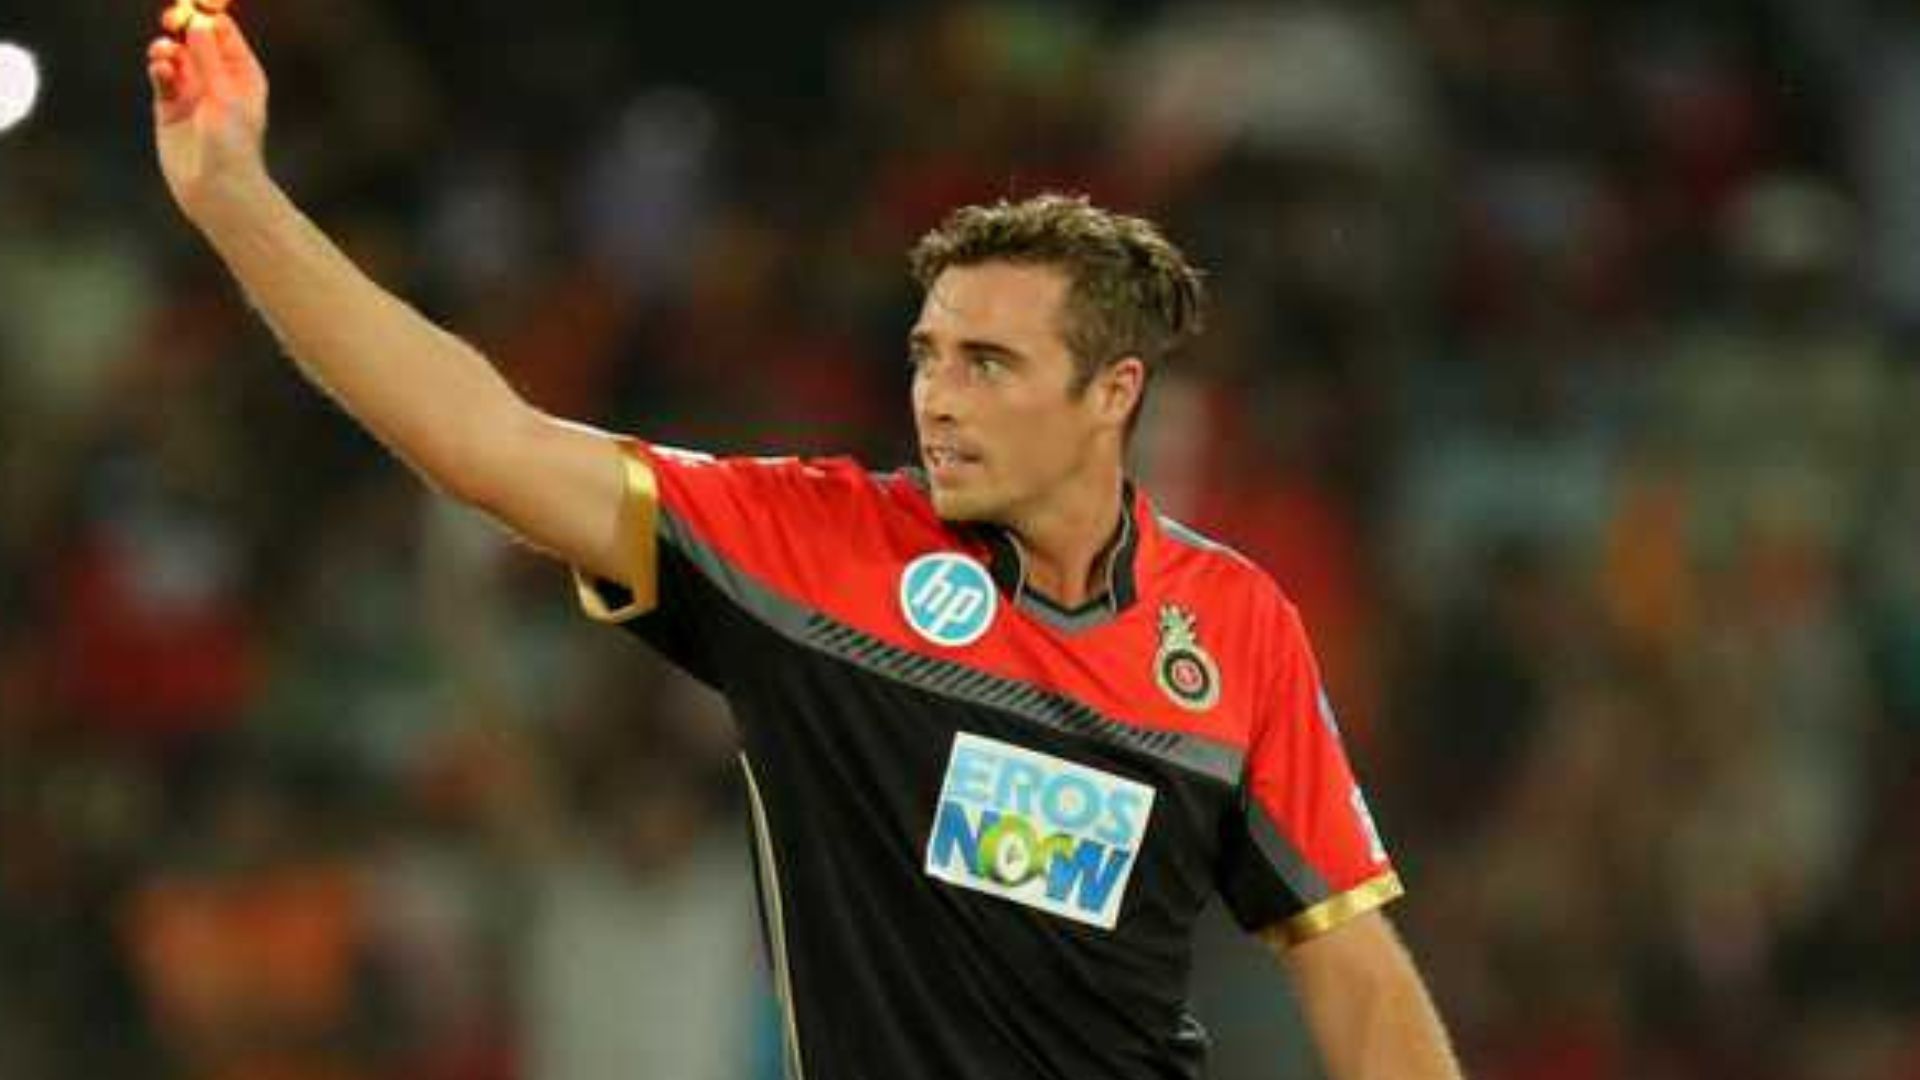 Tim Southee is currently part of the KKR outfit.